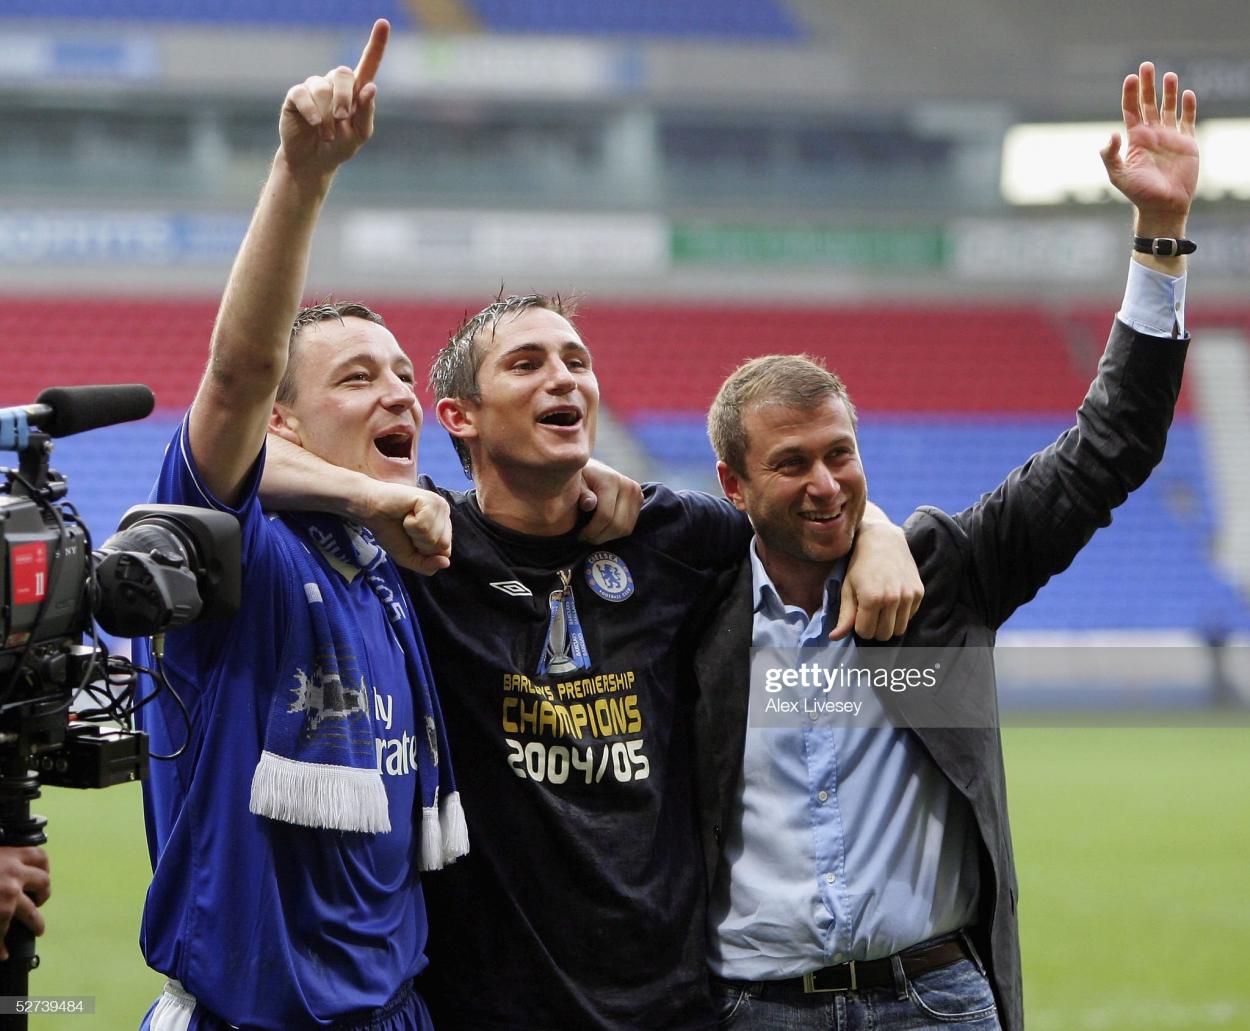 Frank Lampard with Roman Abramovich and John Terry in 2005. (Photo by Alex Livesey/Getty Images)